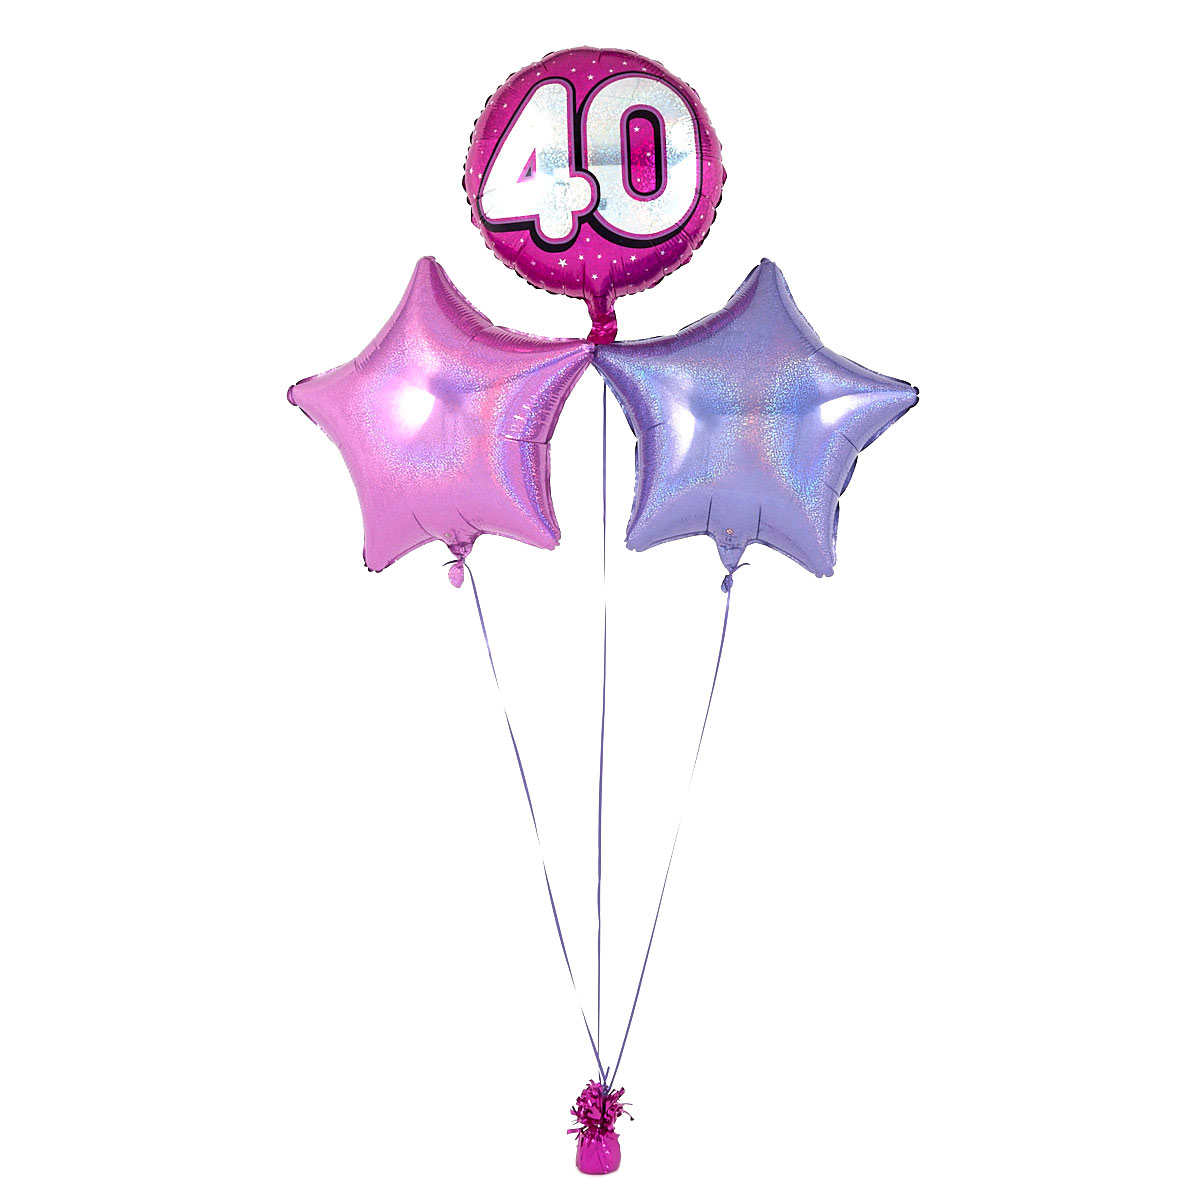 Pink 40th Birthday Balloon Bouquet - DELIVERED INFLATED!